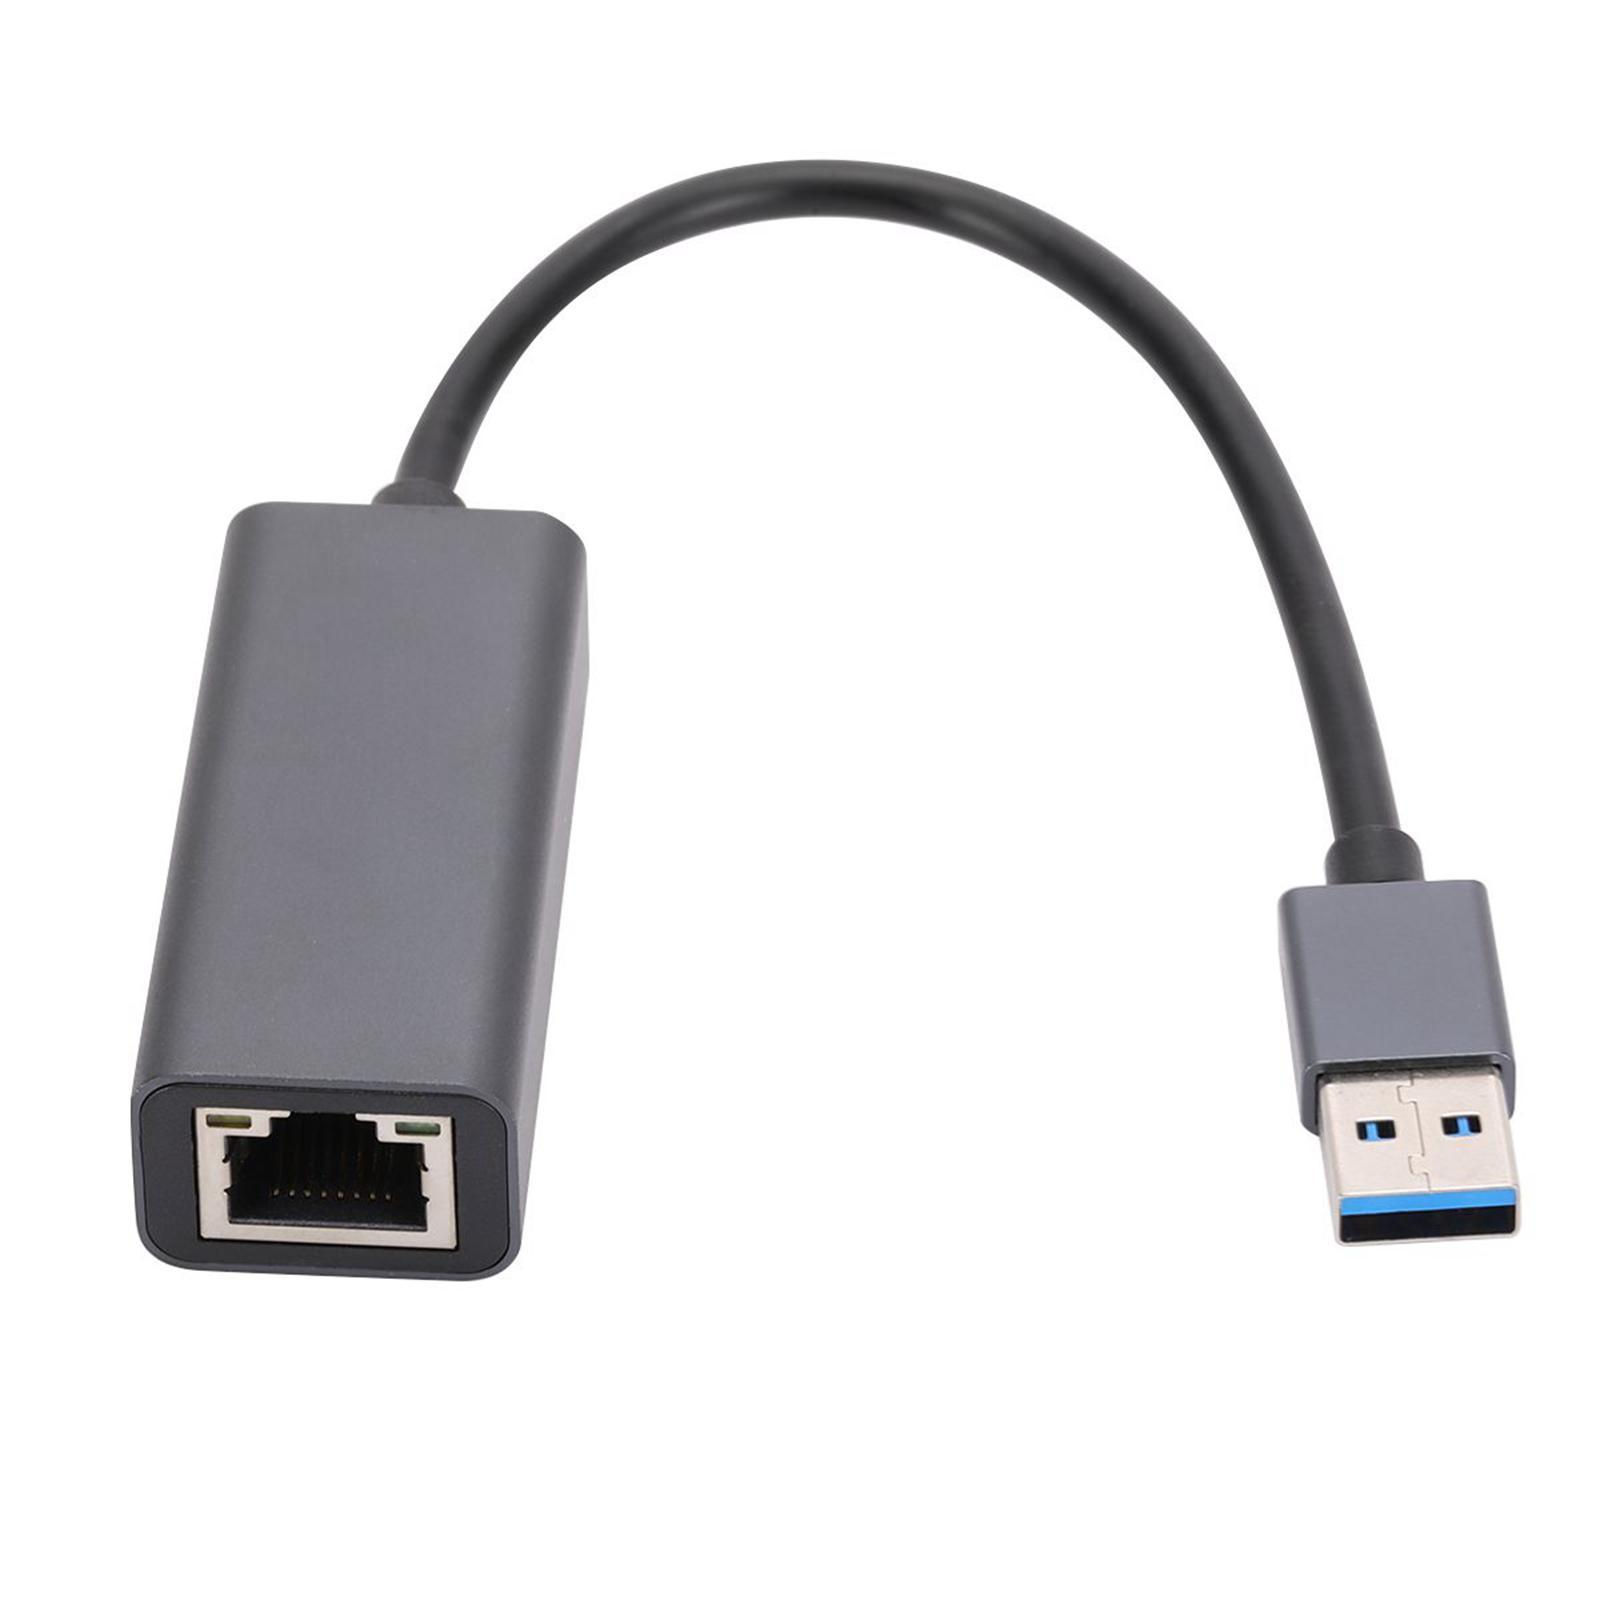 USB Ethernet Adapter, Dongle 10/100/1000Mbps High Speed Network Card for Windows PC Laptop